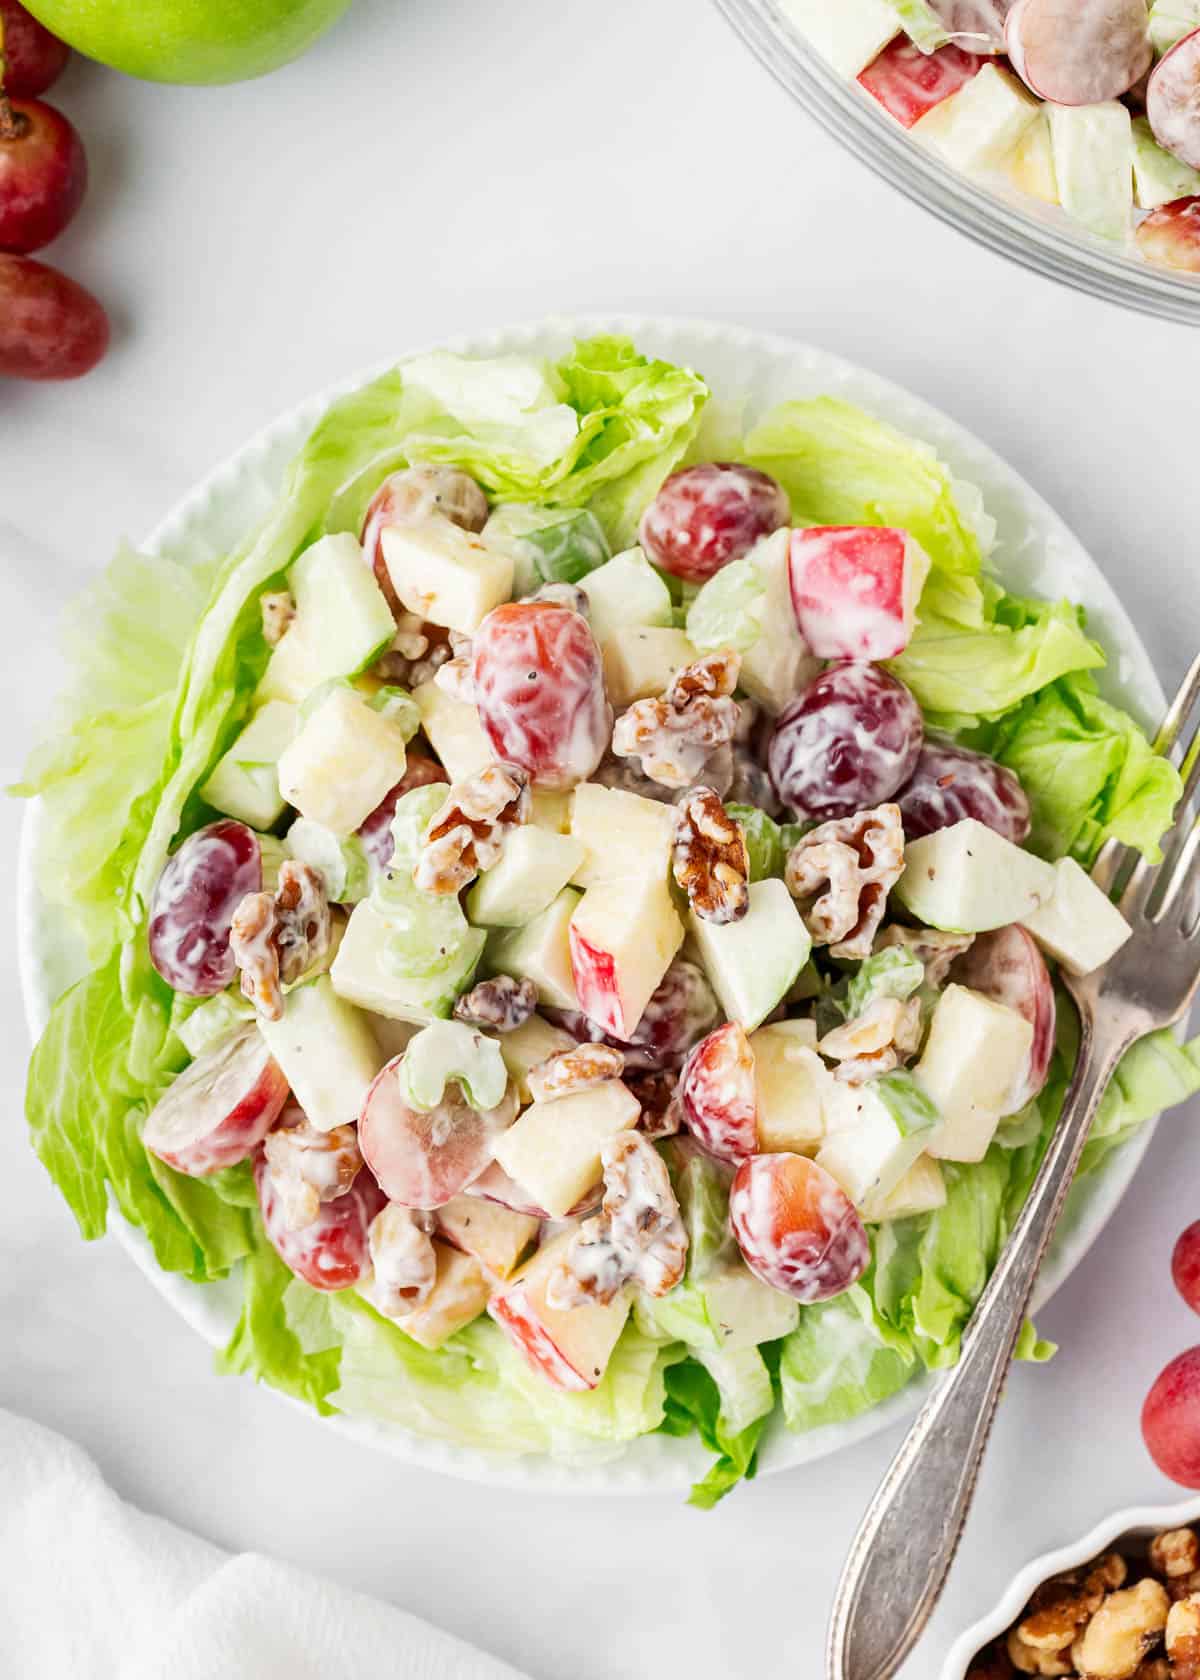 Waldorf salad on a plate with apples.